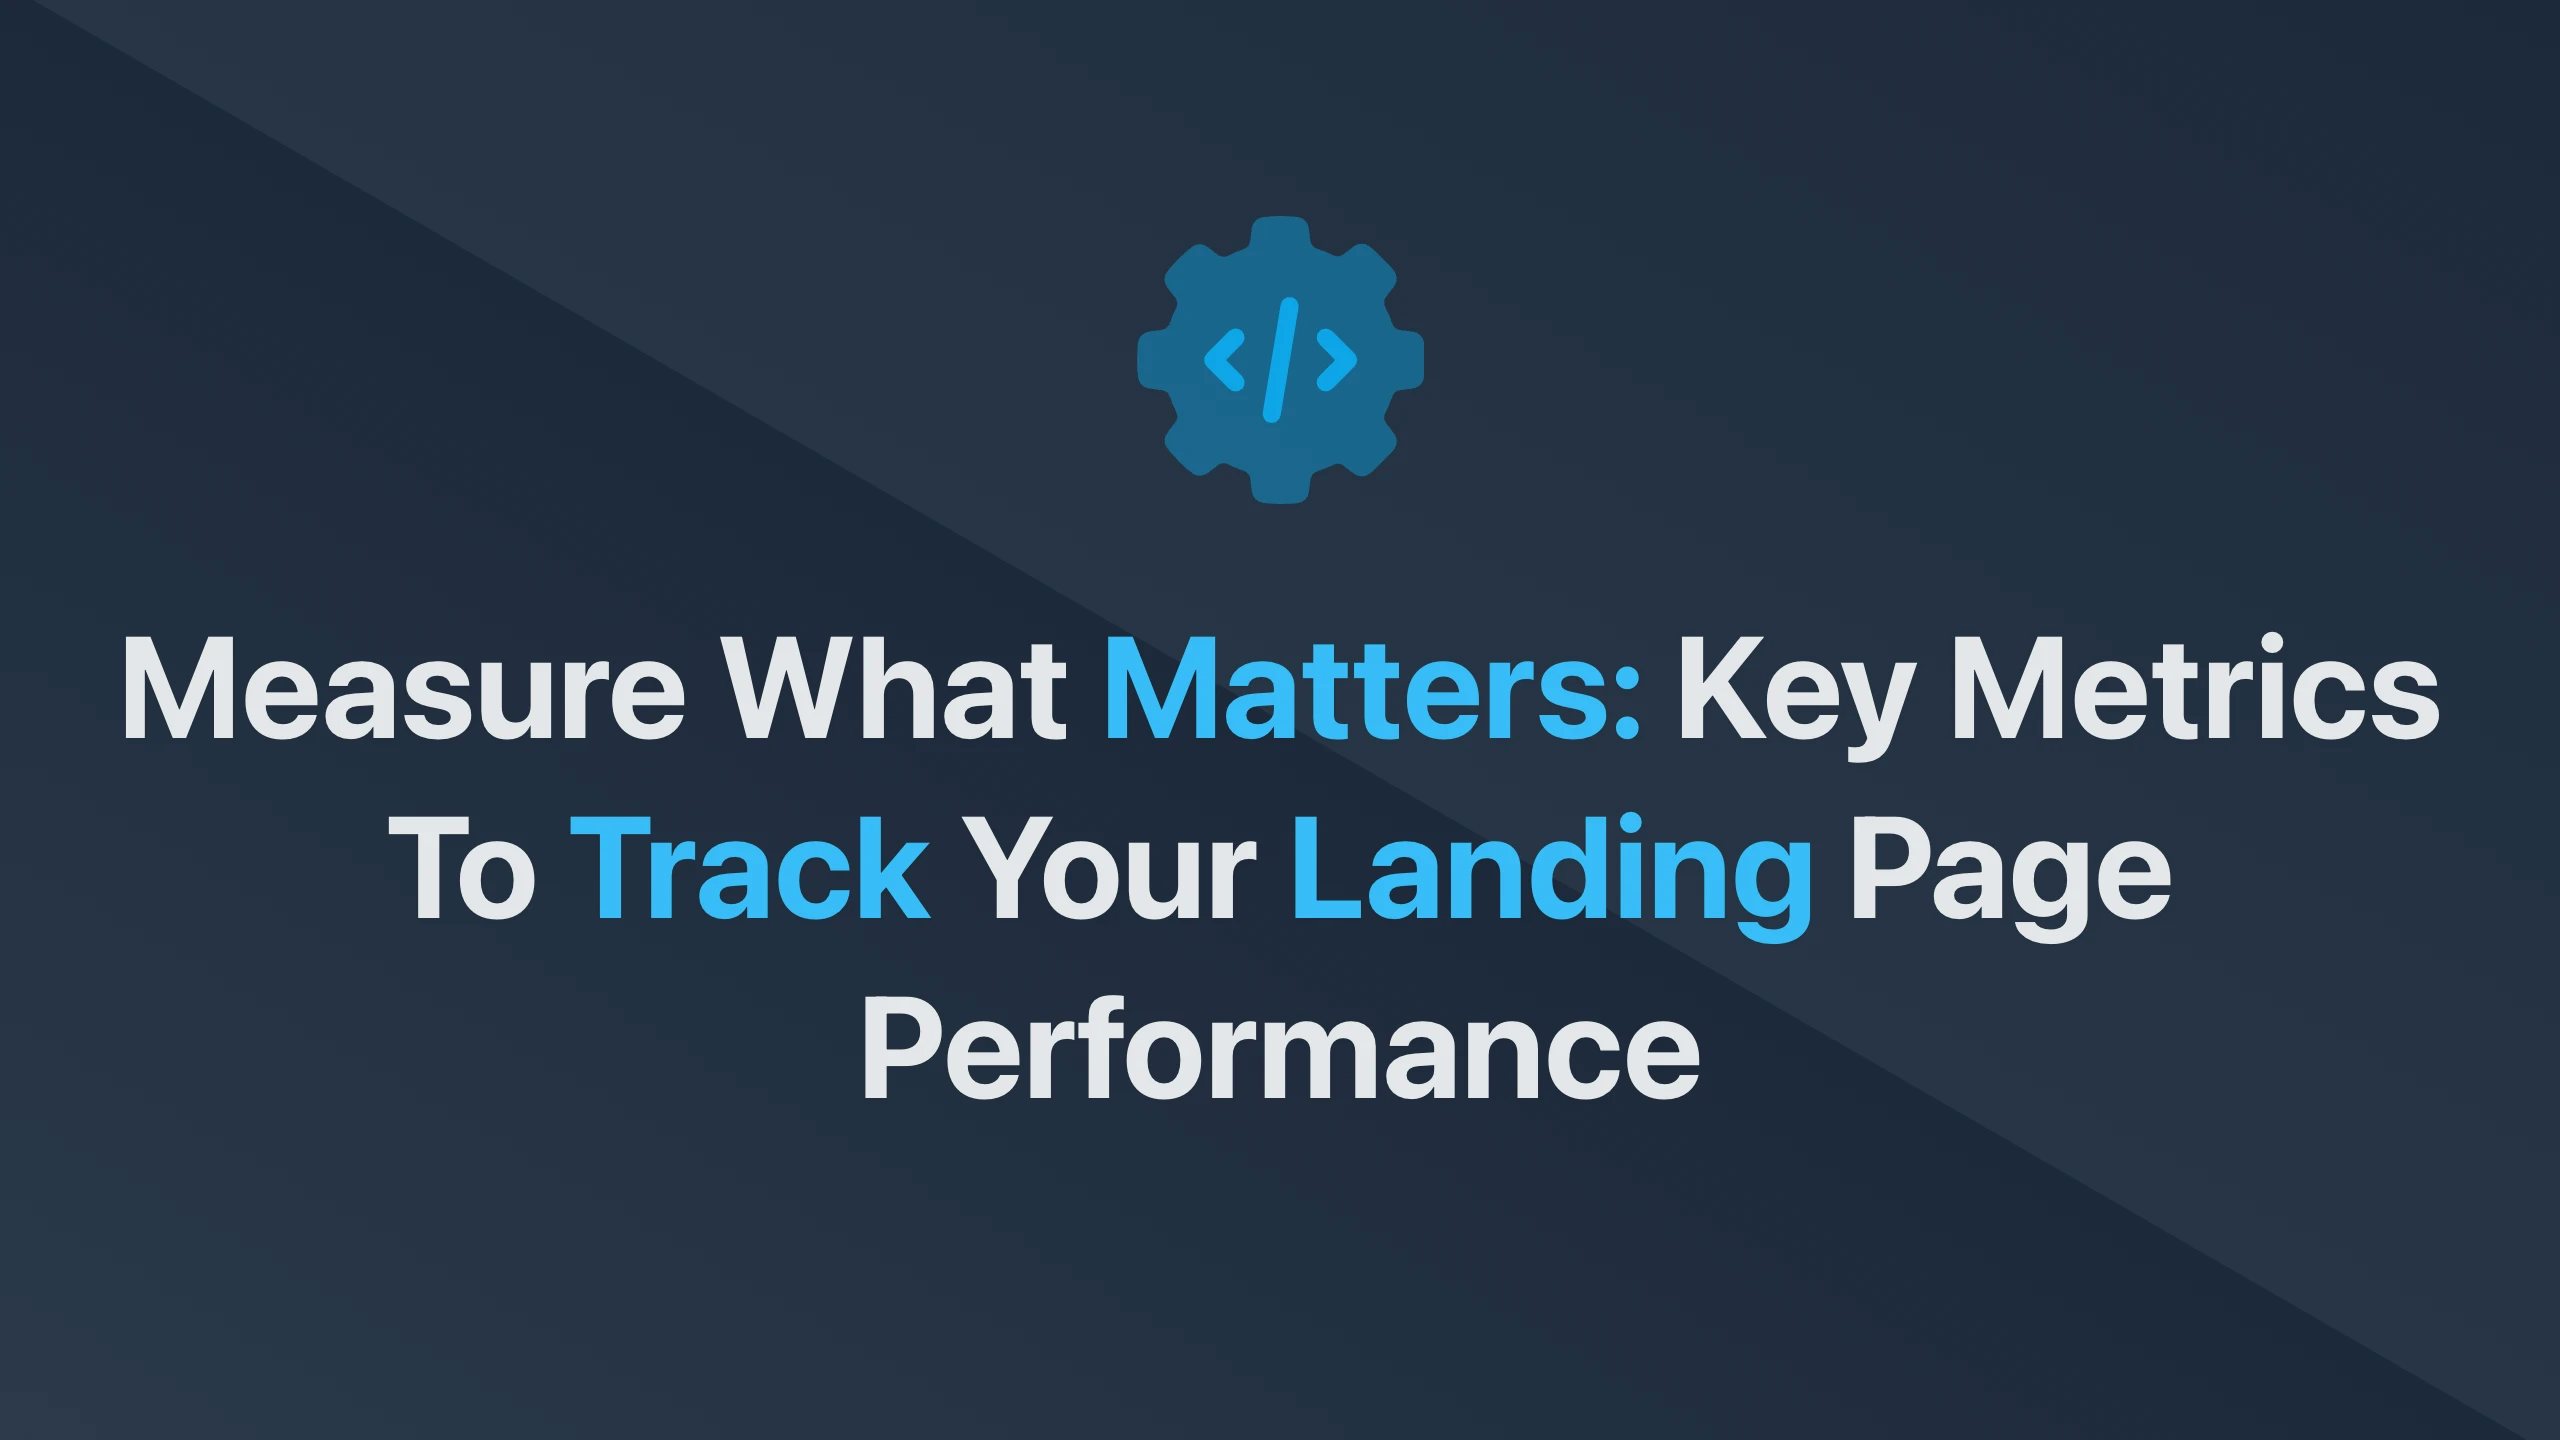 Cover Image for Measure What Matters: Key Metrics to Track Your Landing Page Performance